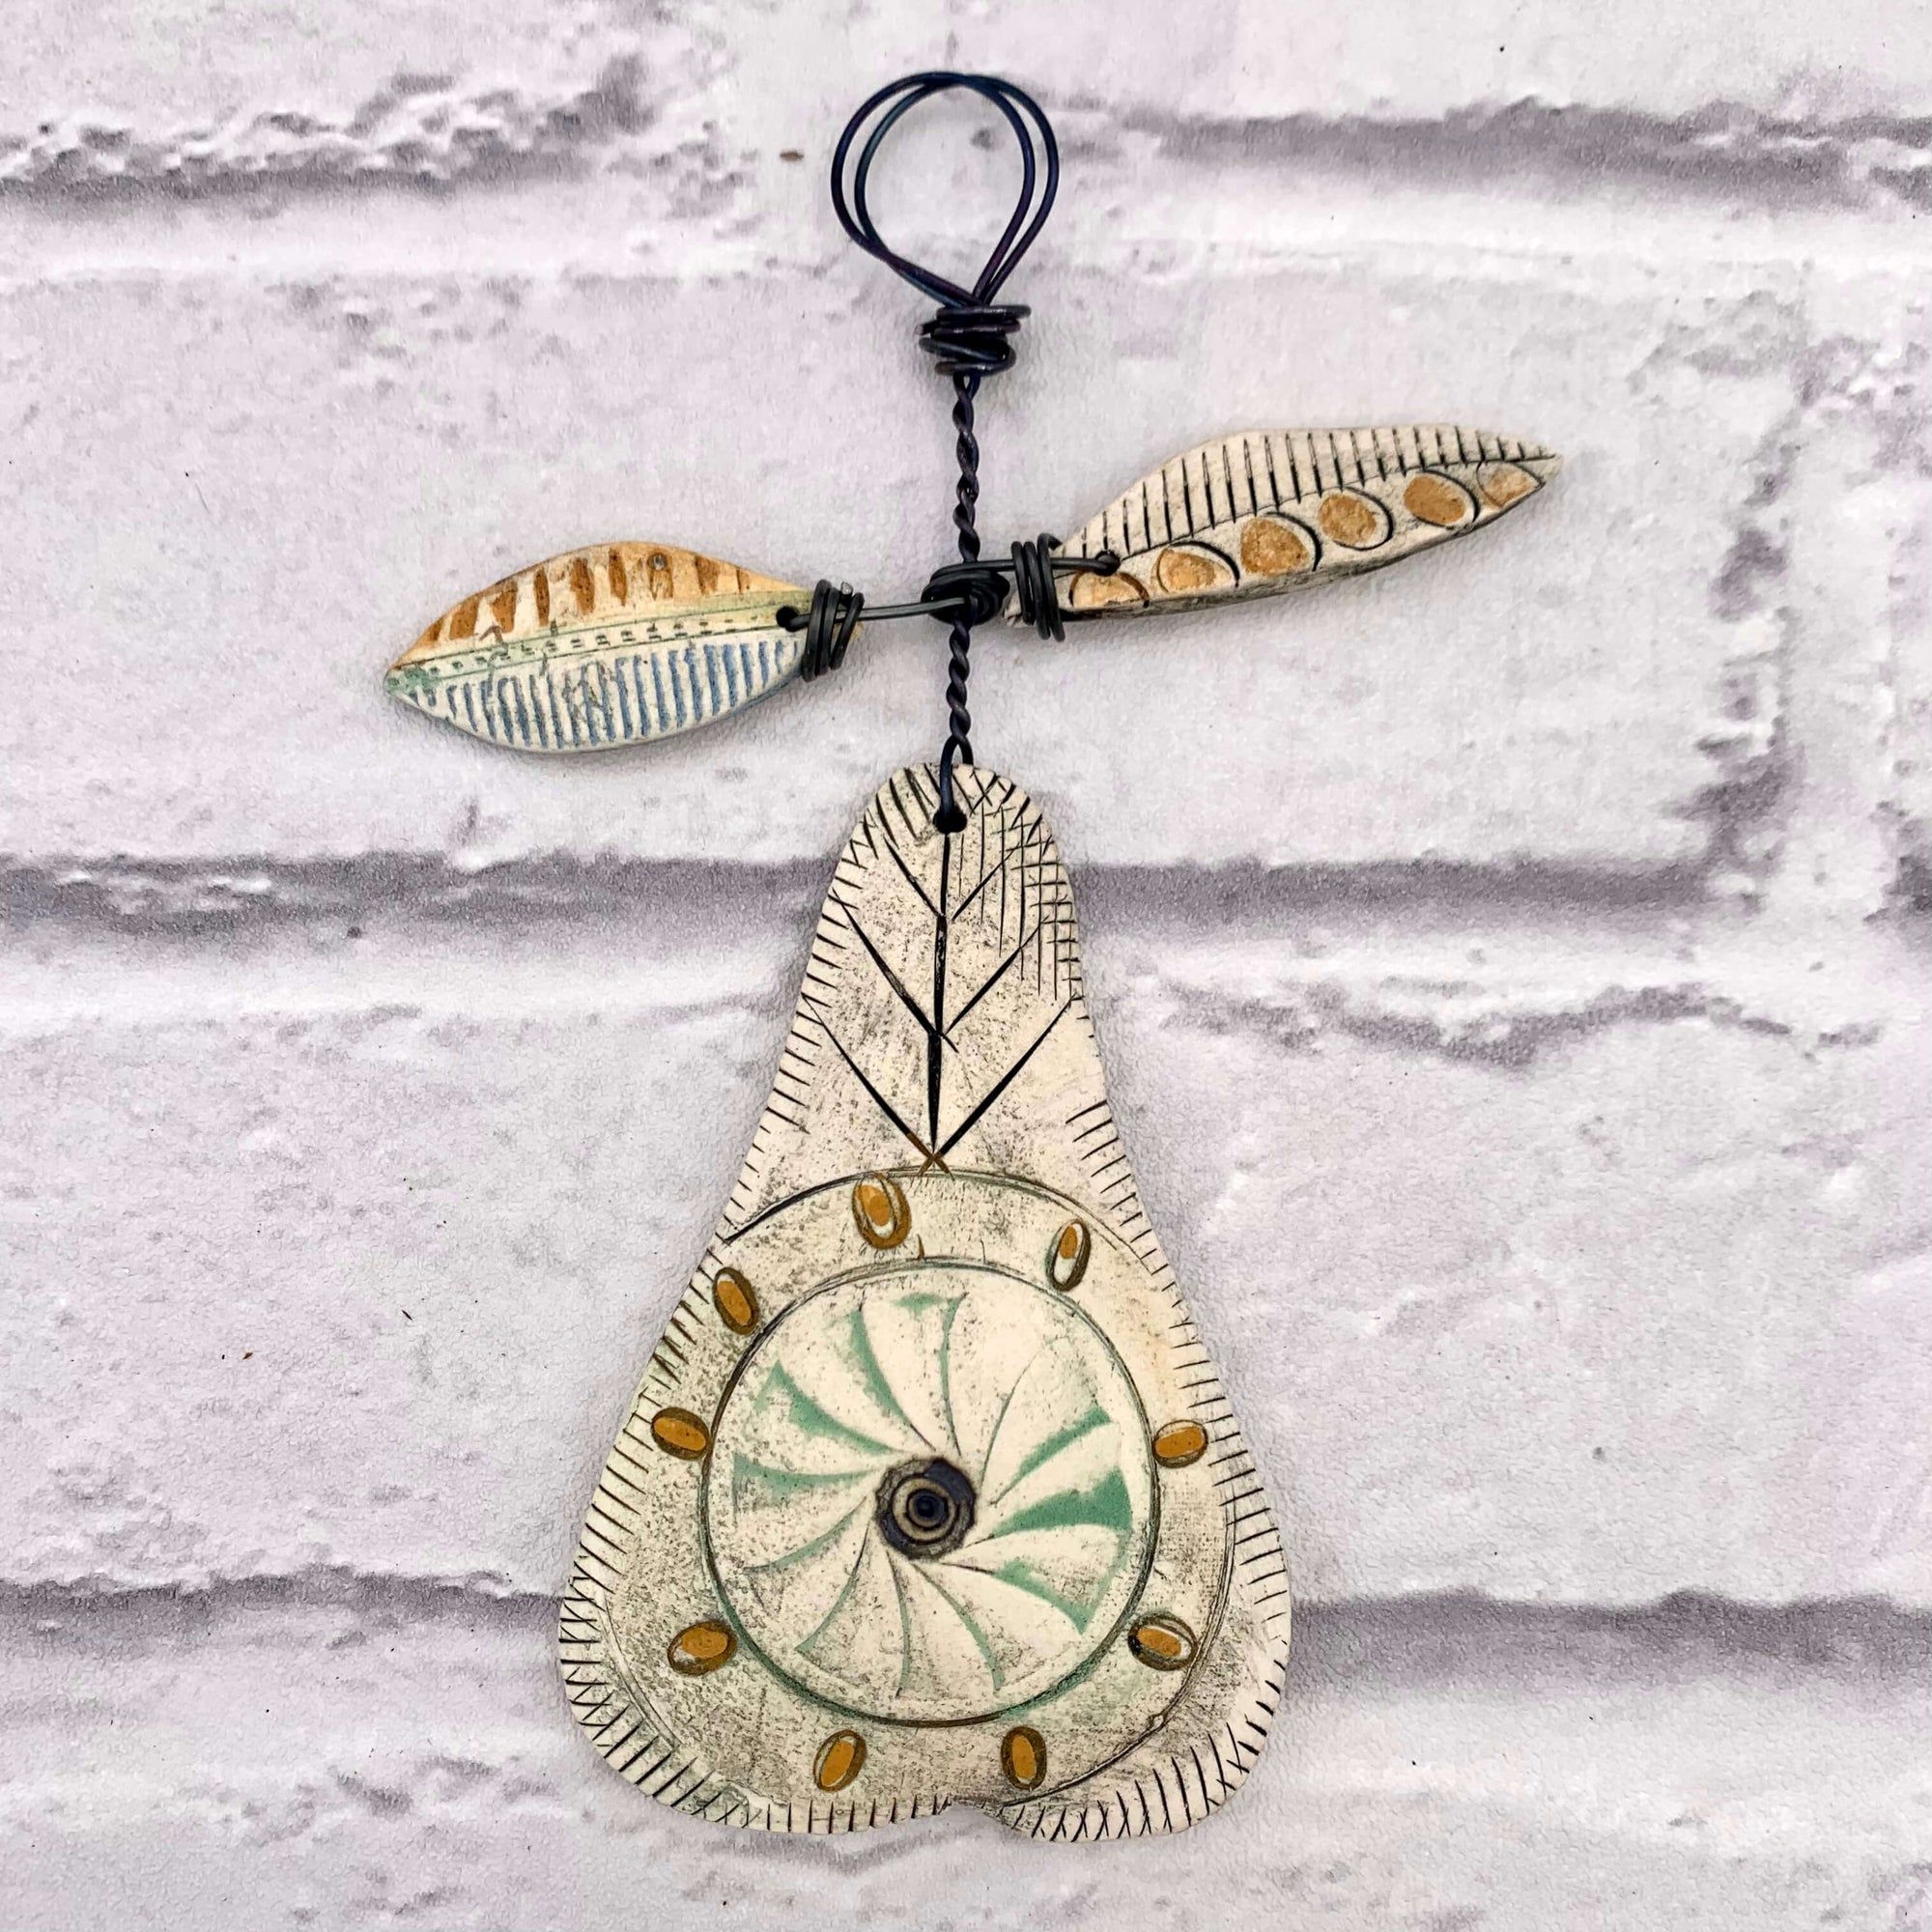 Handmade ceramic pear decoration, with orange and green glazing, hanging from a thick wire with two ceramic leaves. Crafted by Shirley Vauvelle.